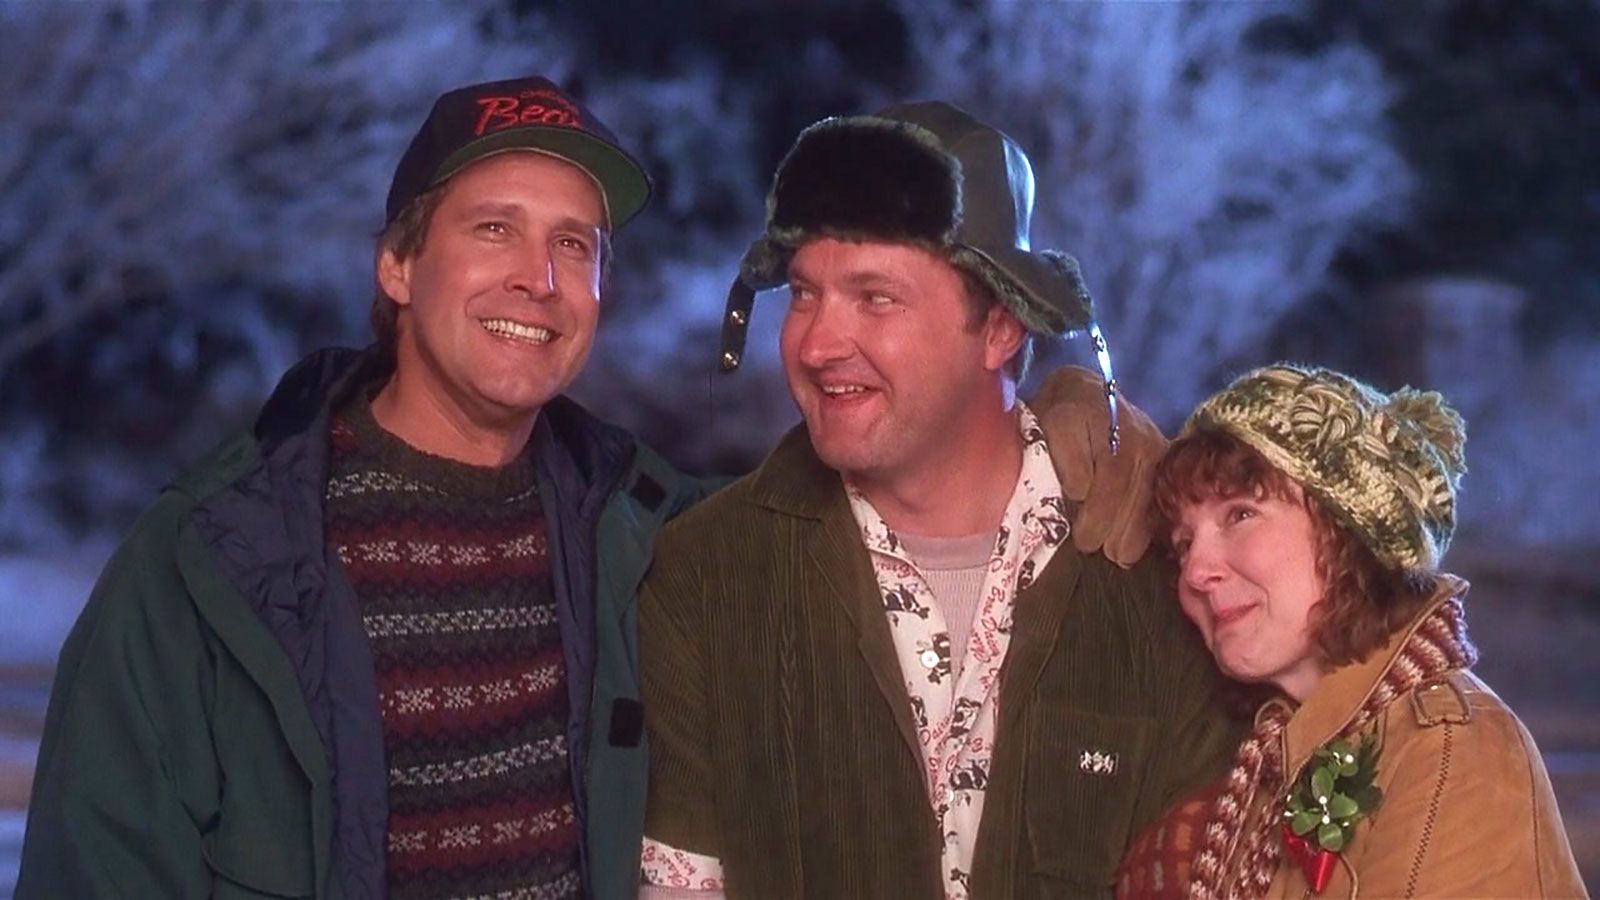 Chevy Chase in "National Lampoon's Christmas Vacation" 